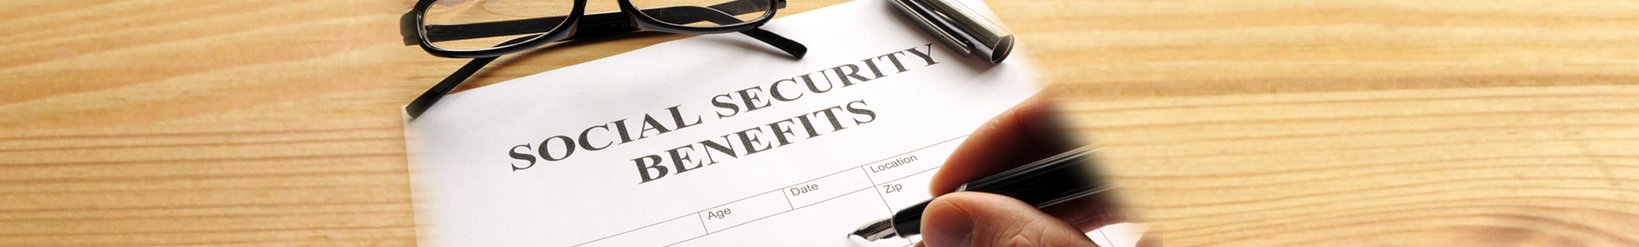 Social Security Disability Benefits for Hepatitis or Other Chronic Liver Diseases (Page 1)